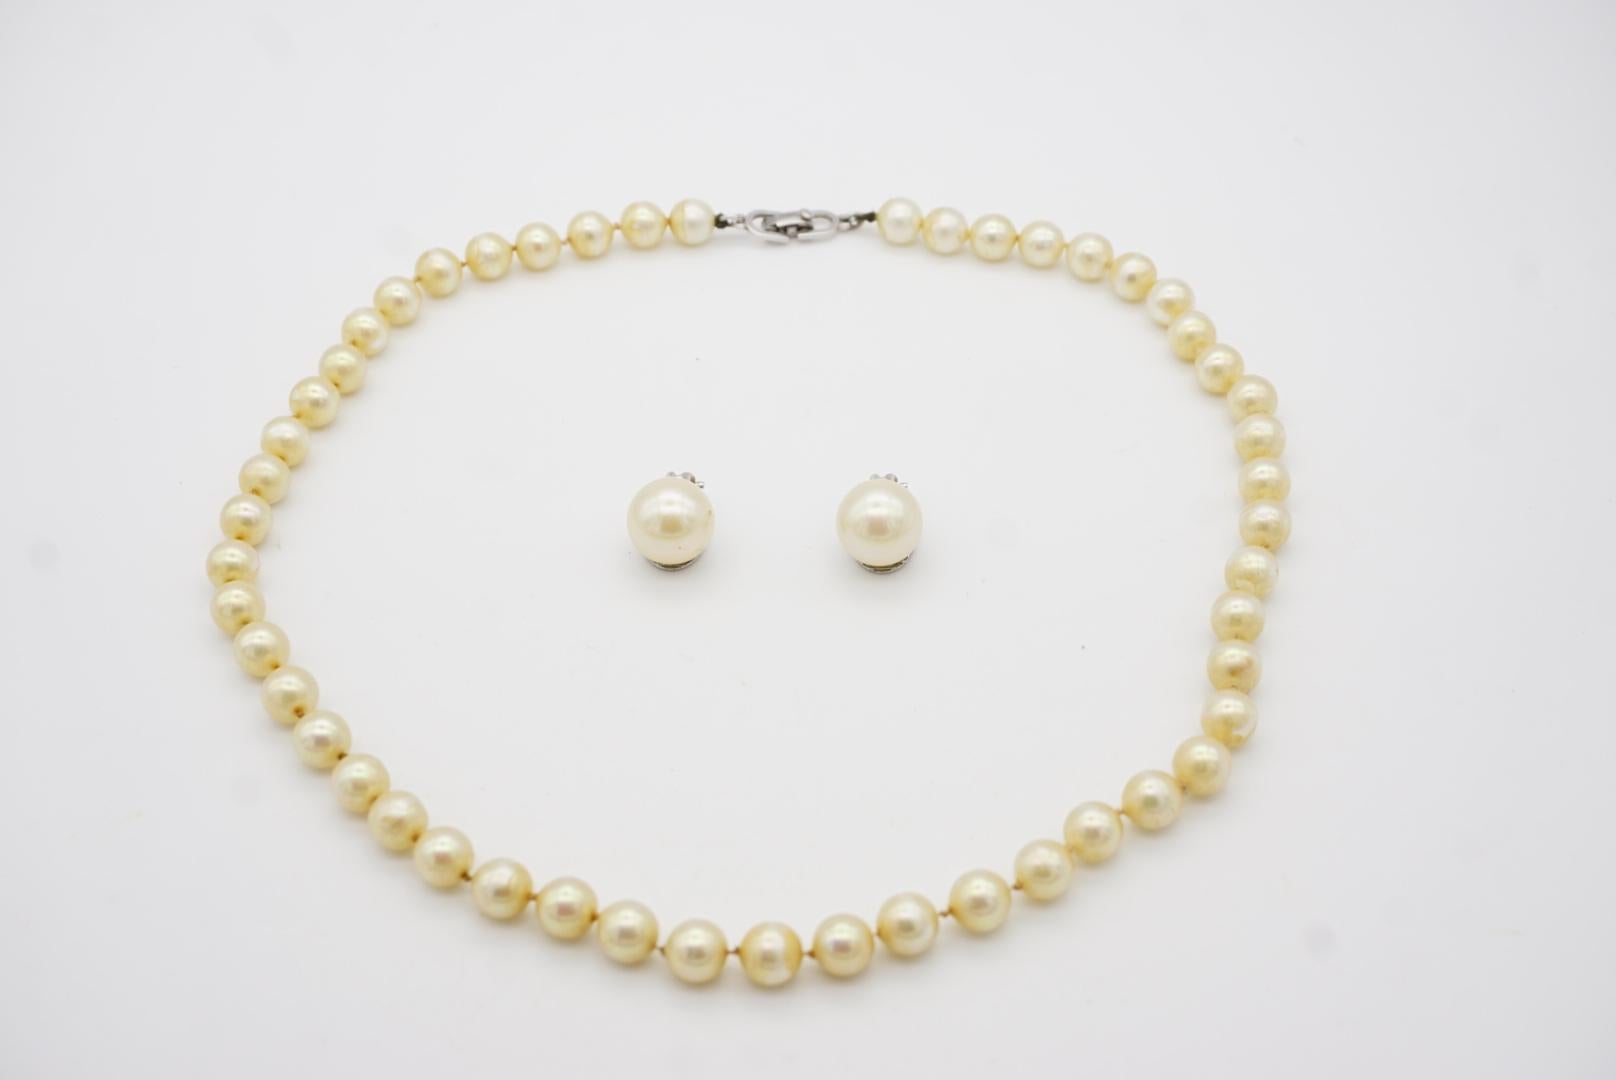 Christian Dior Vintage 1980s White Round Pearls Set Silver Necklace Earrings 1